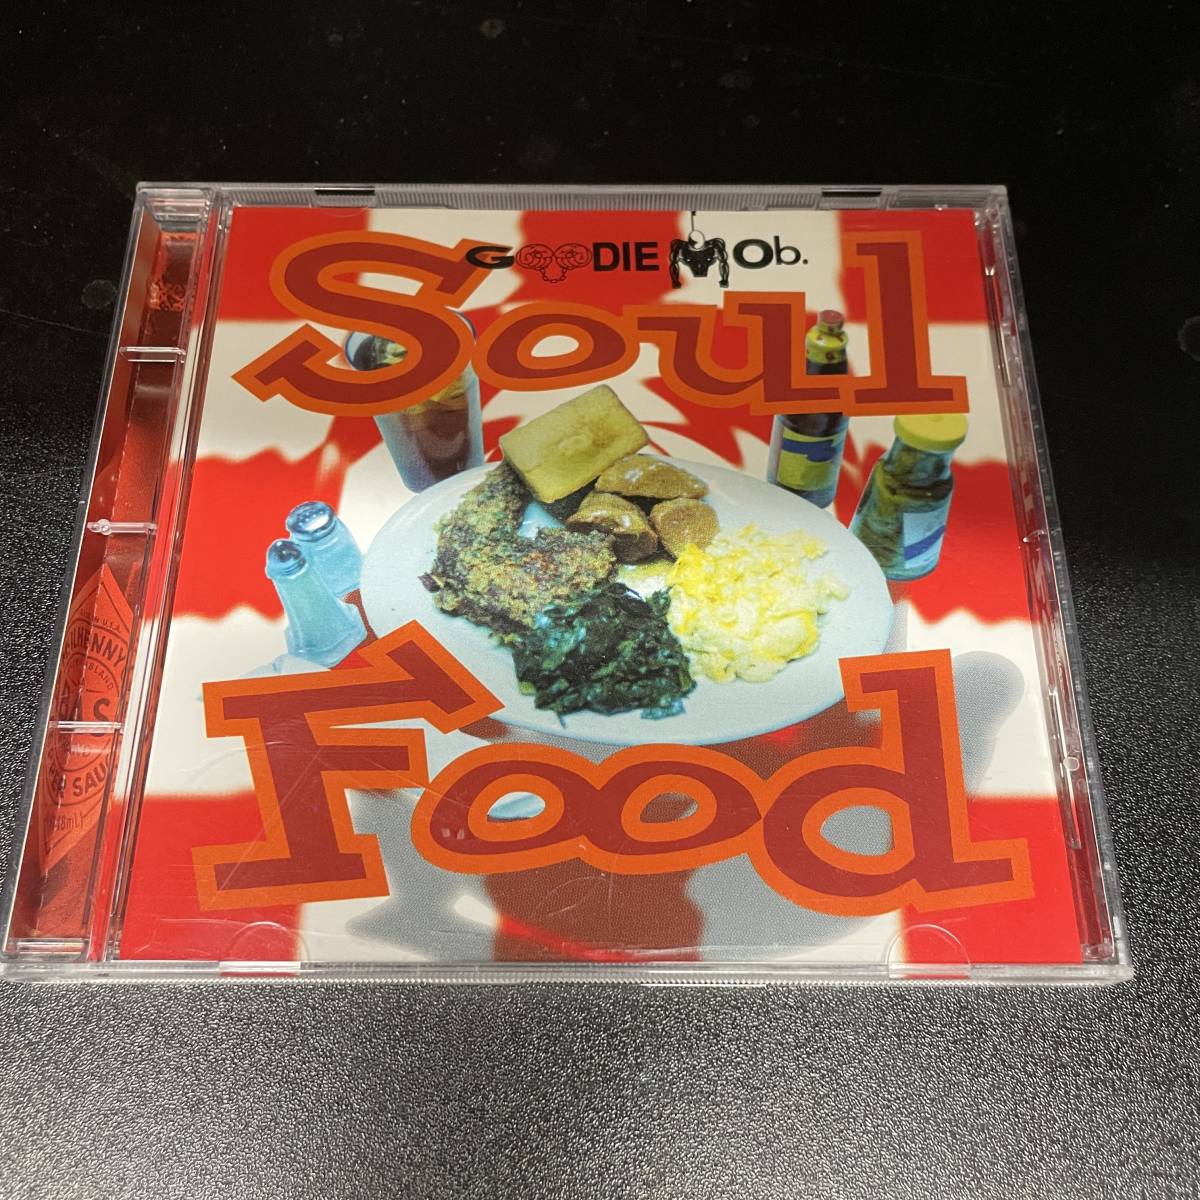 ● HIPHOP,R&B GOODIE MOB - SOUL FOOD シングル, 3 SONGS, REMIX, INST, 90'S, 1996, PROMO CD 中古品_画像1